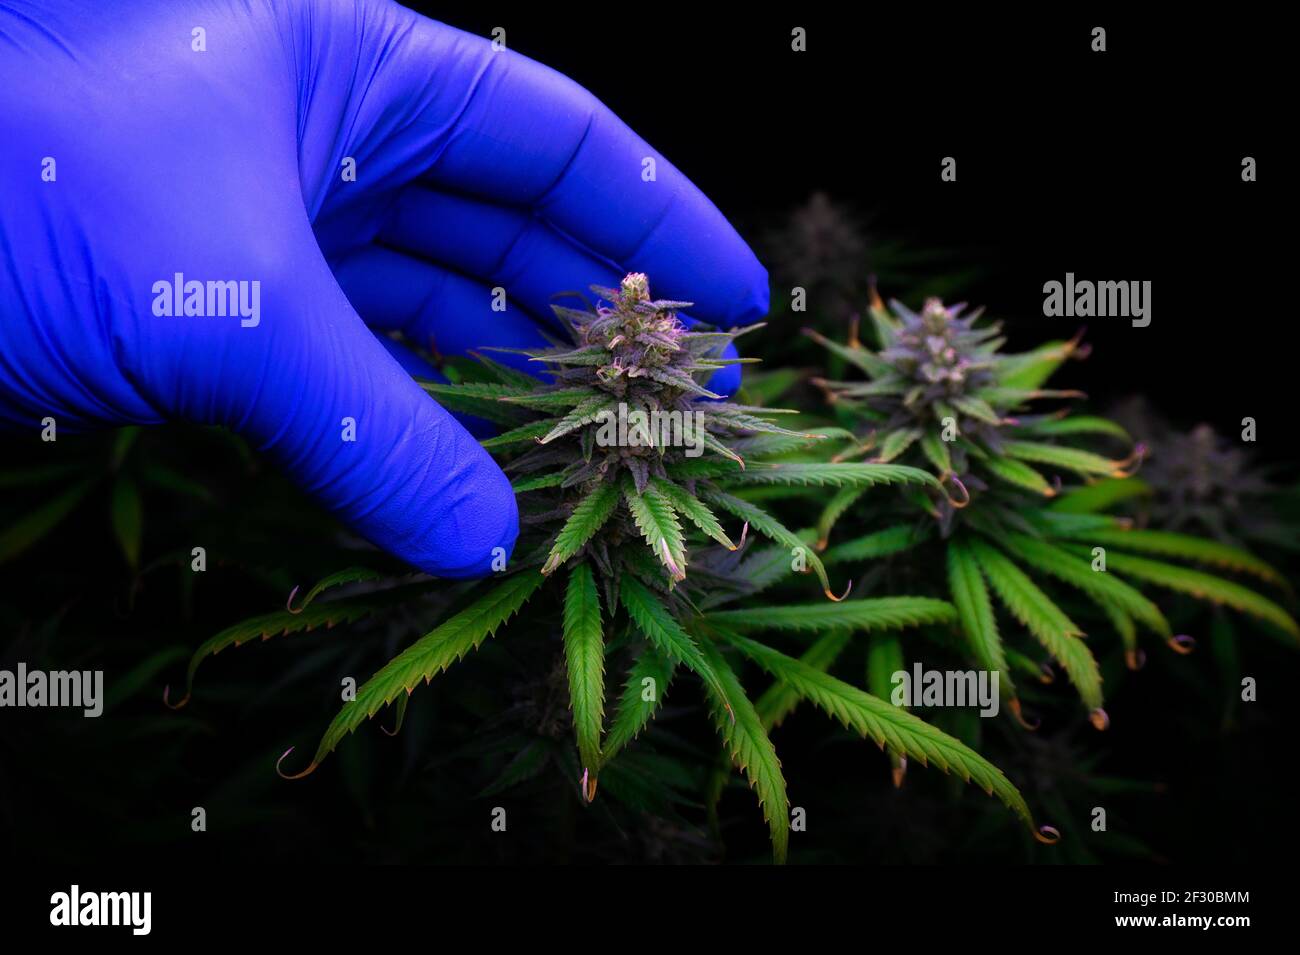 cannabis bud with a purple tint from a hand in a blue glove Stock Photo